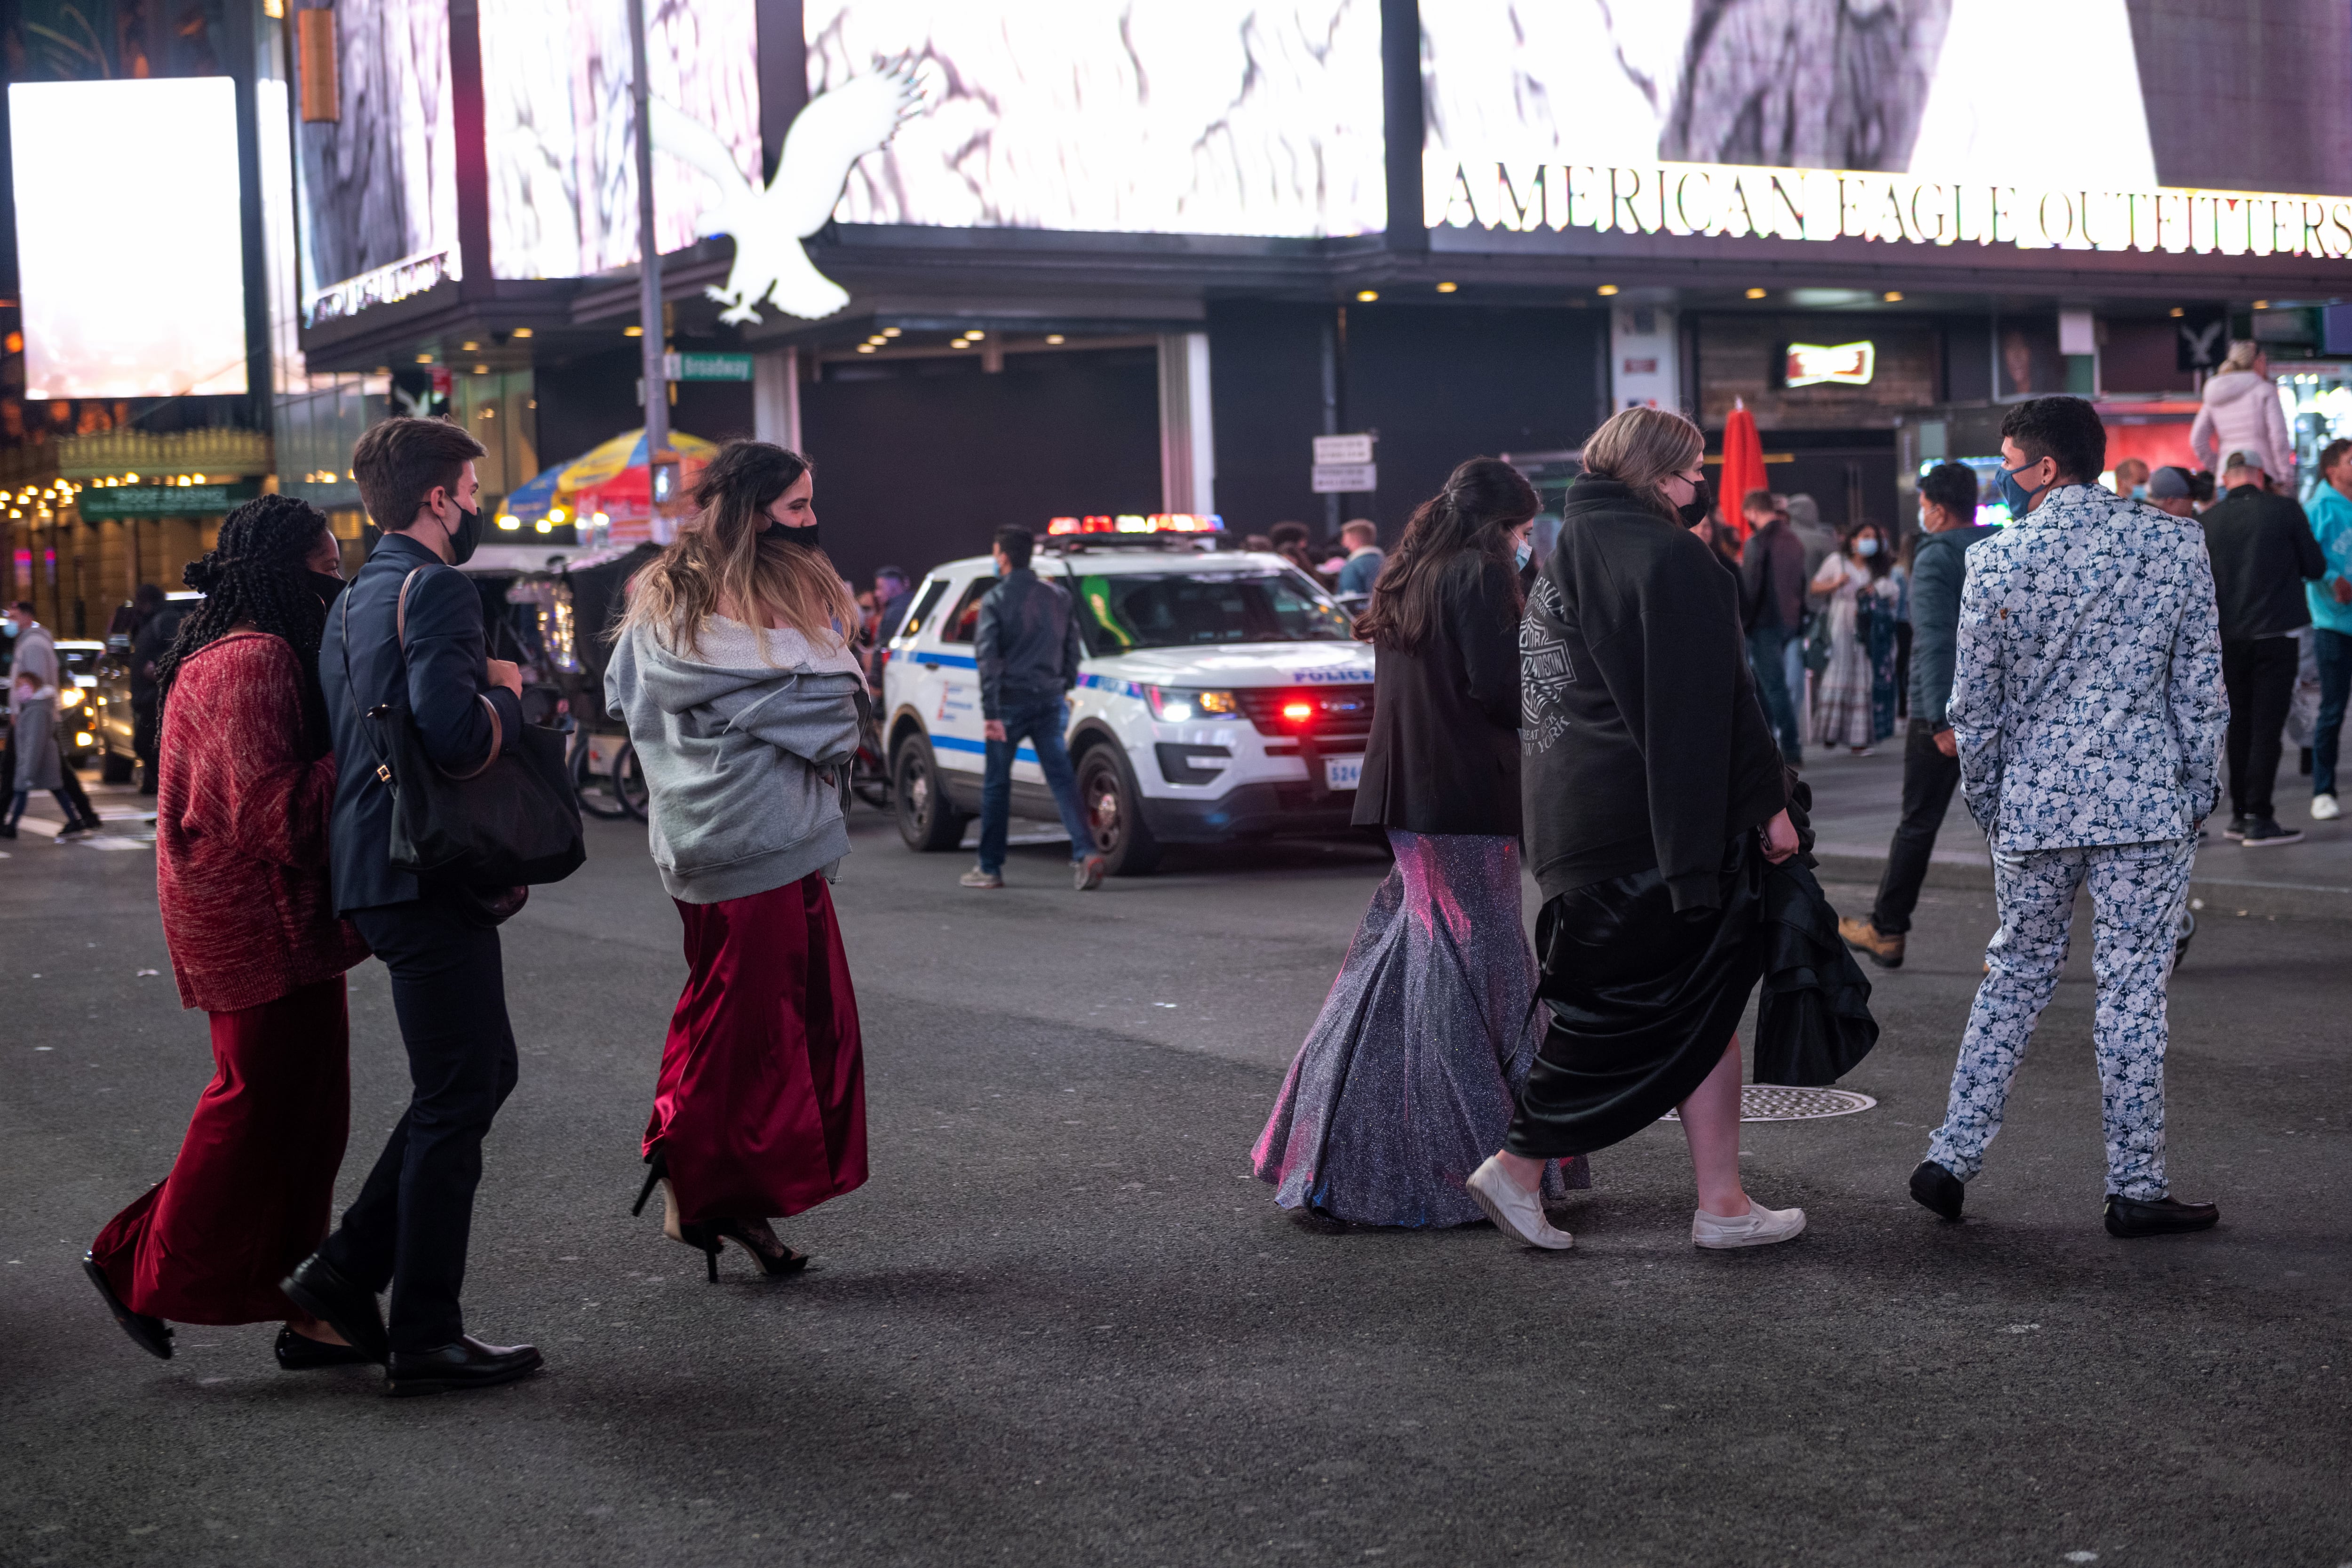 Students walk through New York City’s Times Square wearing prom attire.